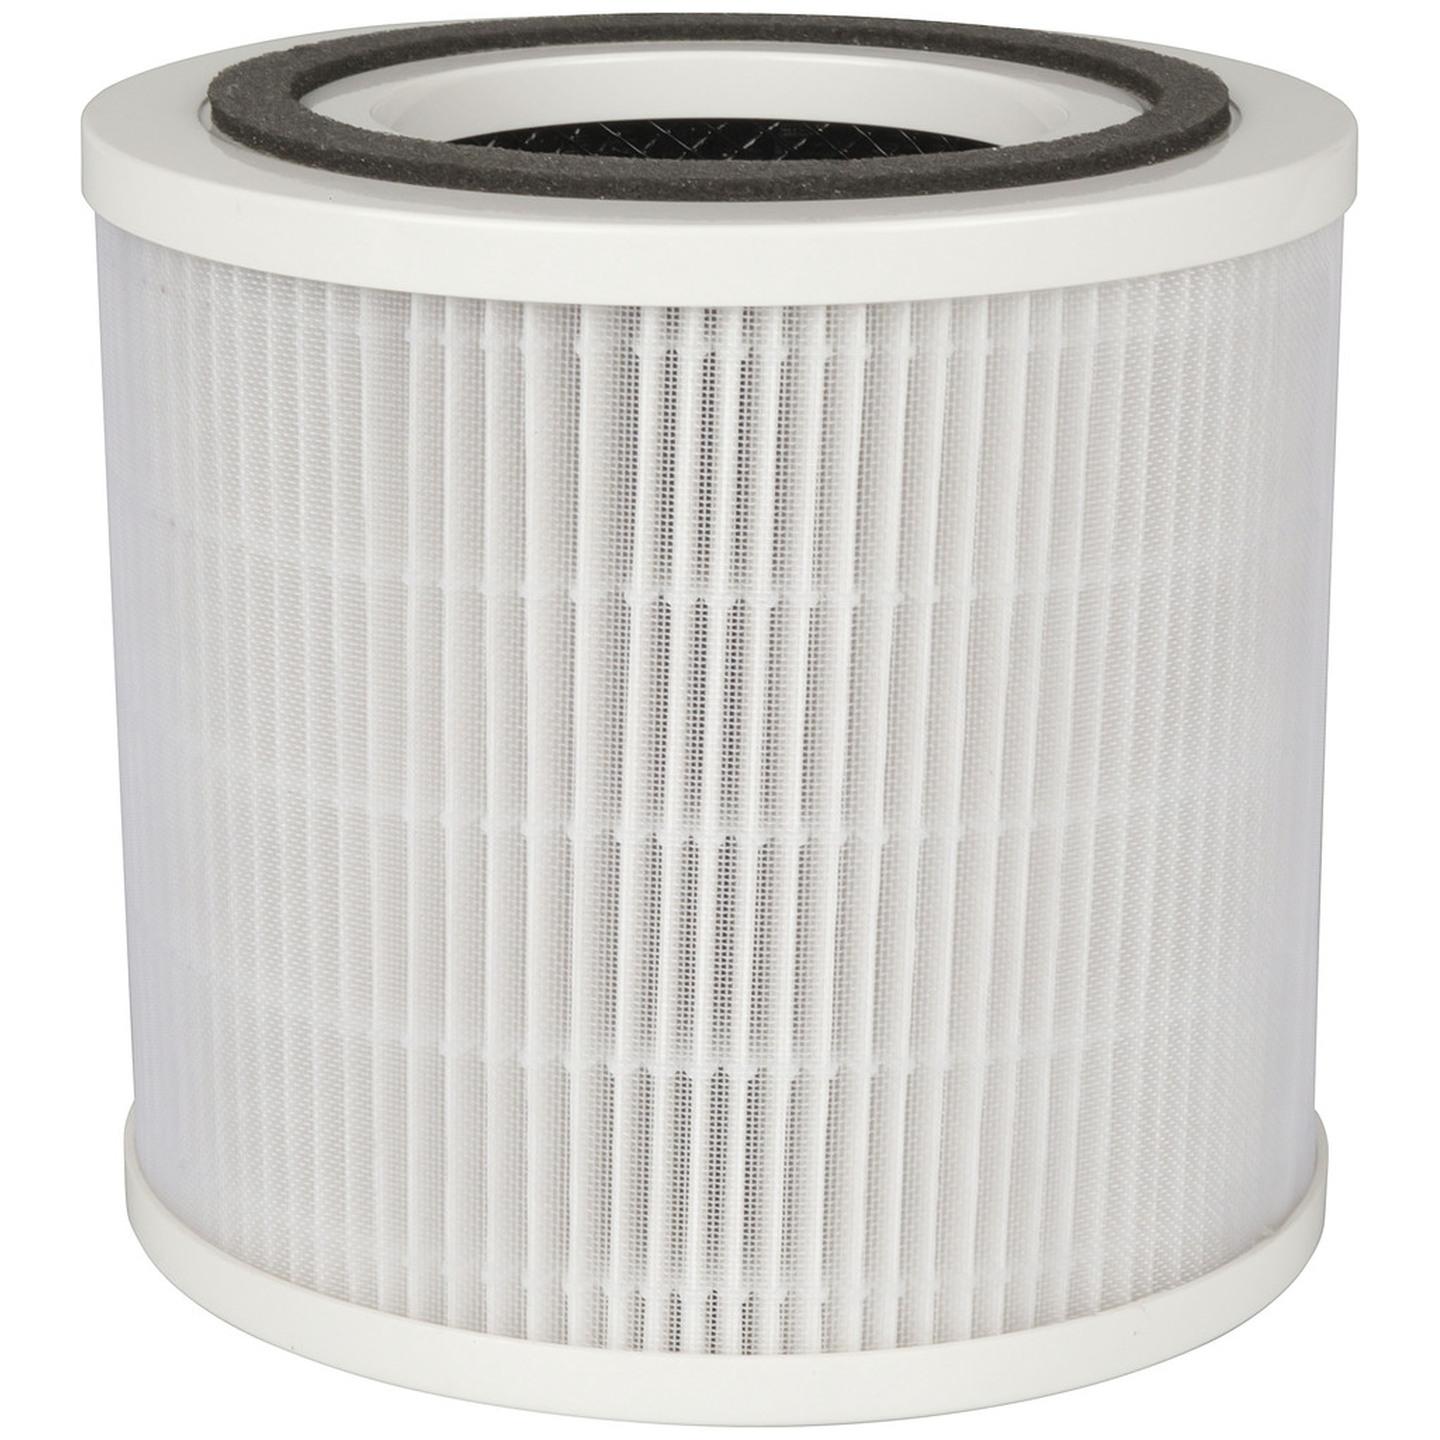 Spare 3-In-1 Filter to suit GH-1952 Air Purifier